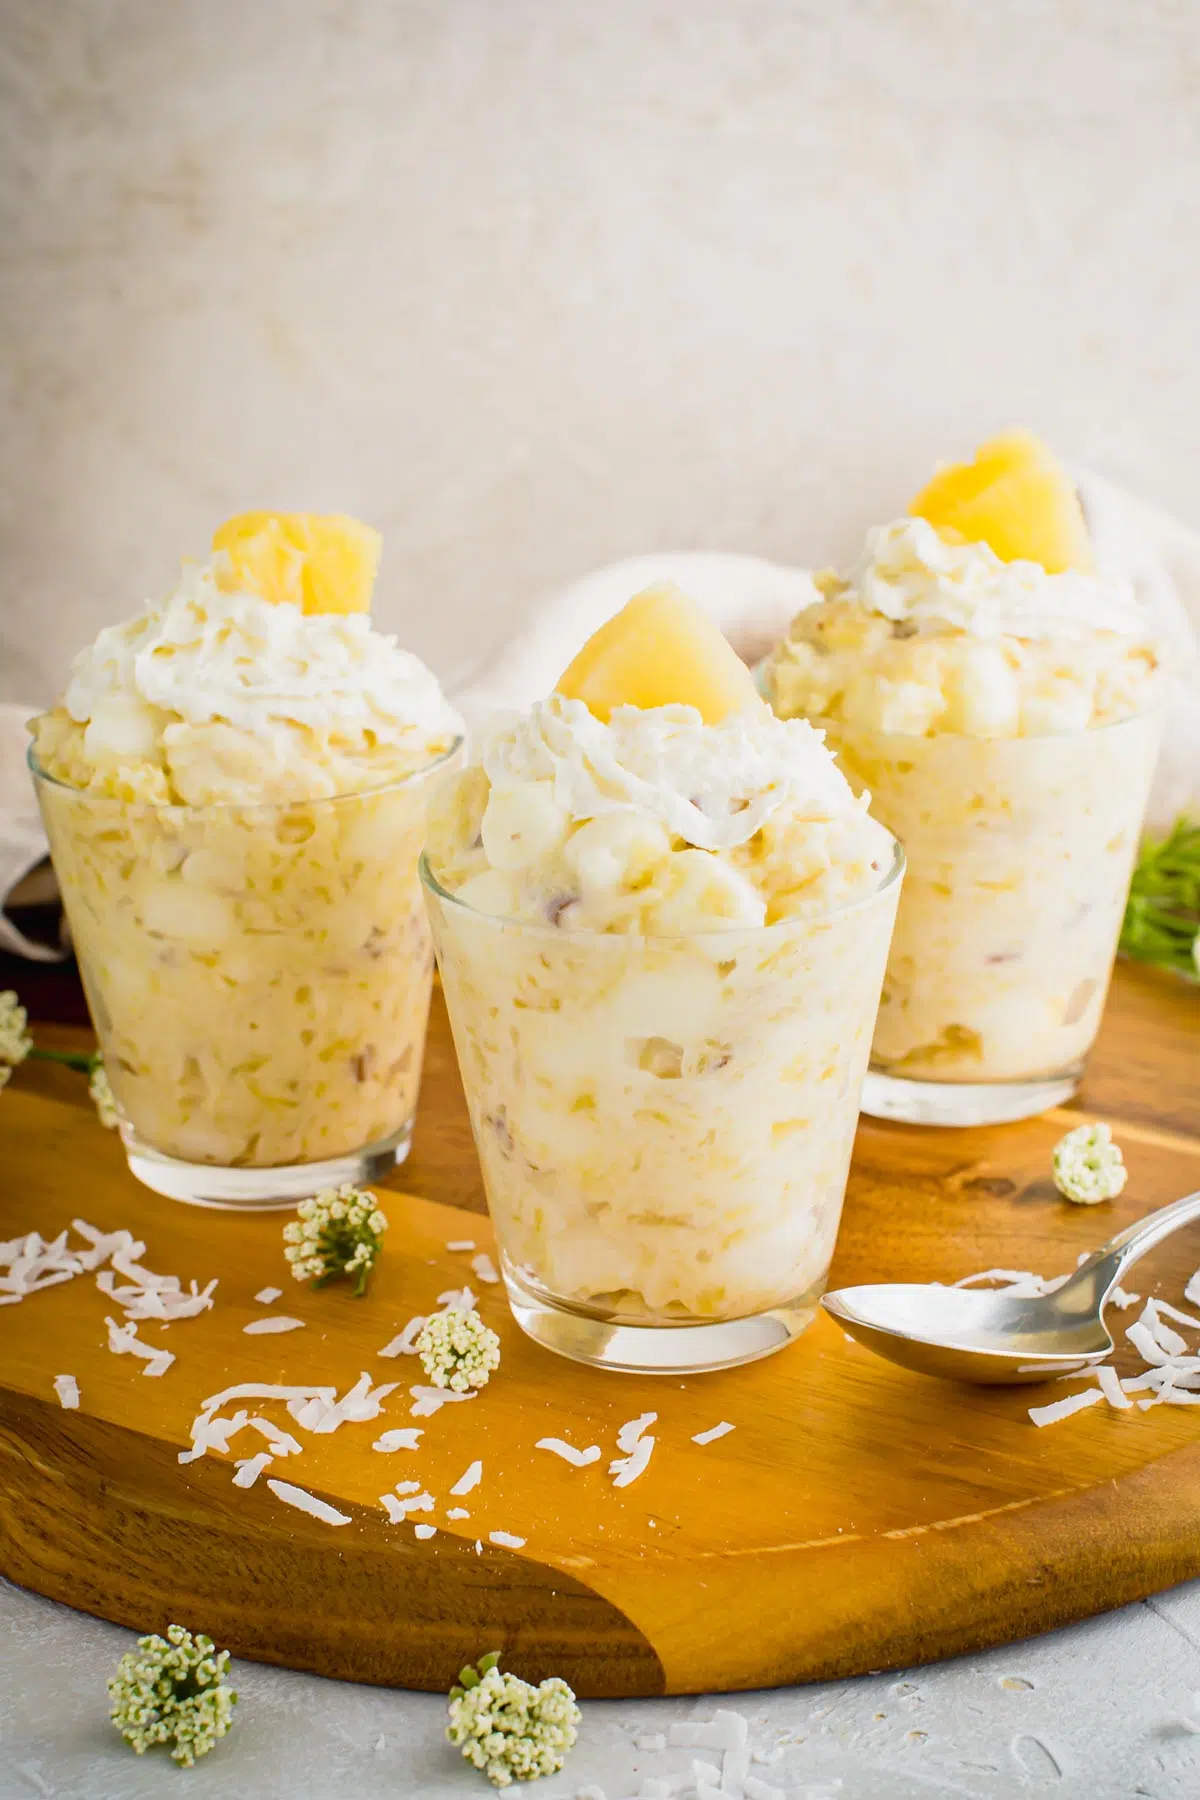 Pineapple fluff jello salad in glass cups on a wooden serving tray.